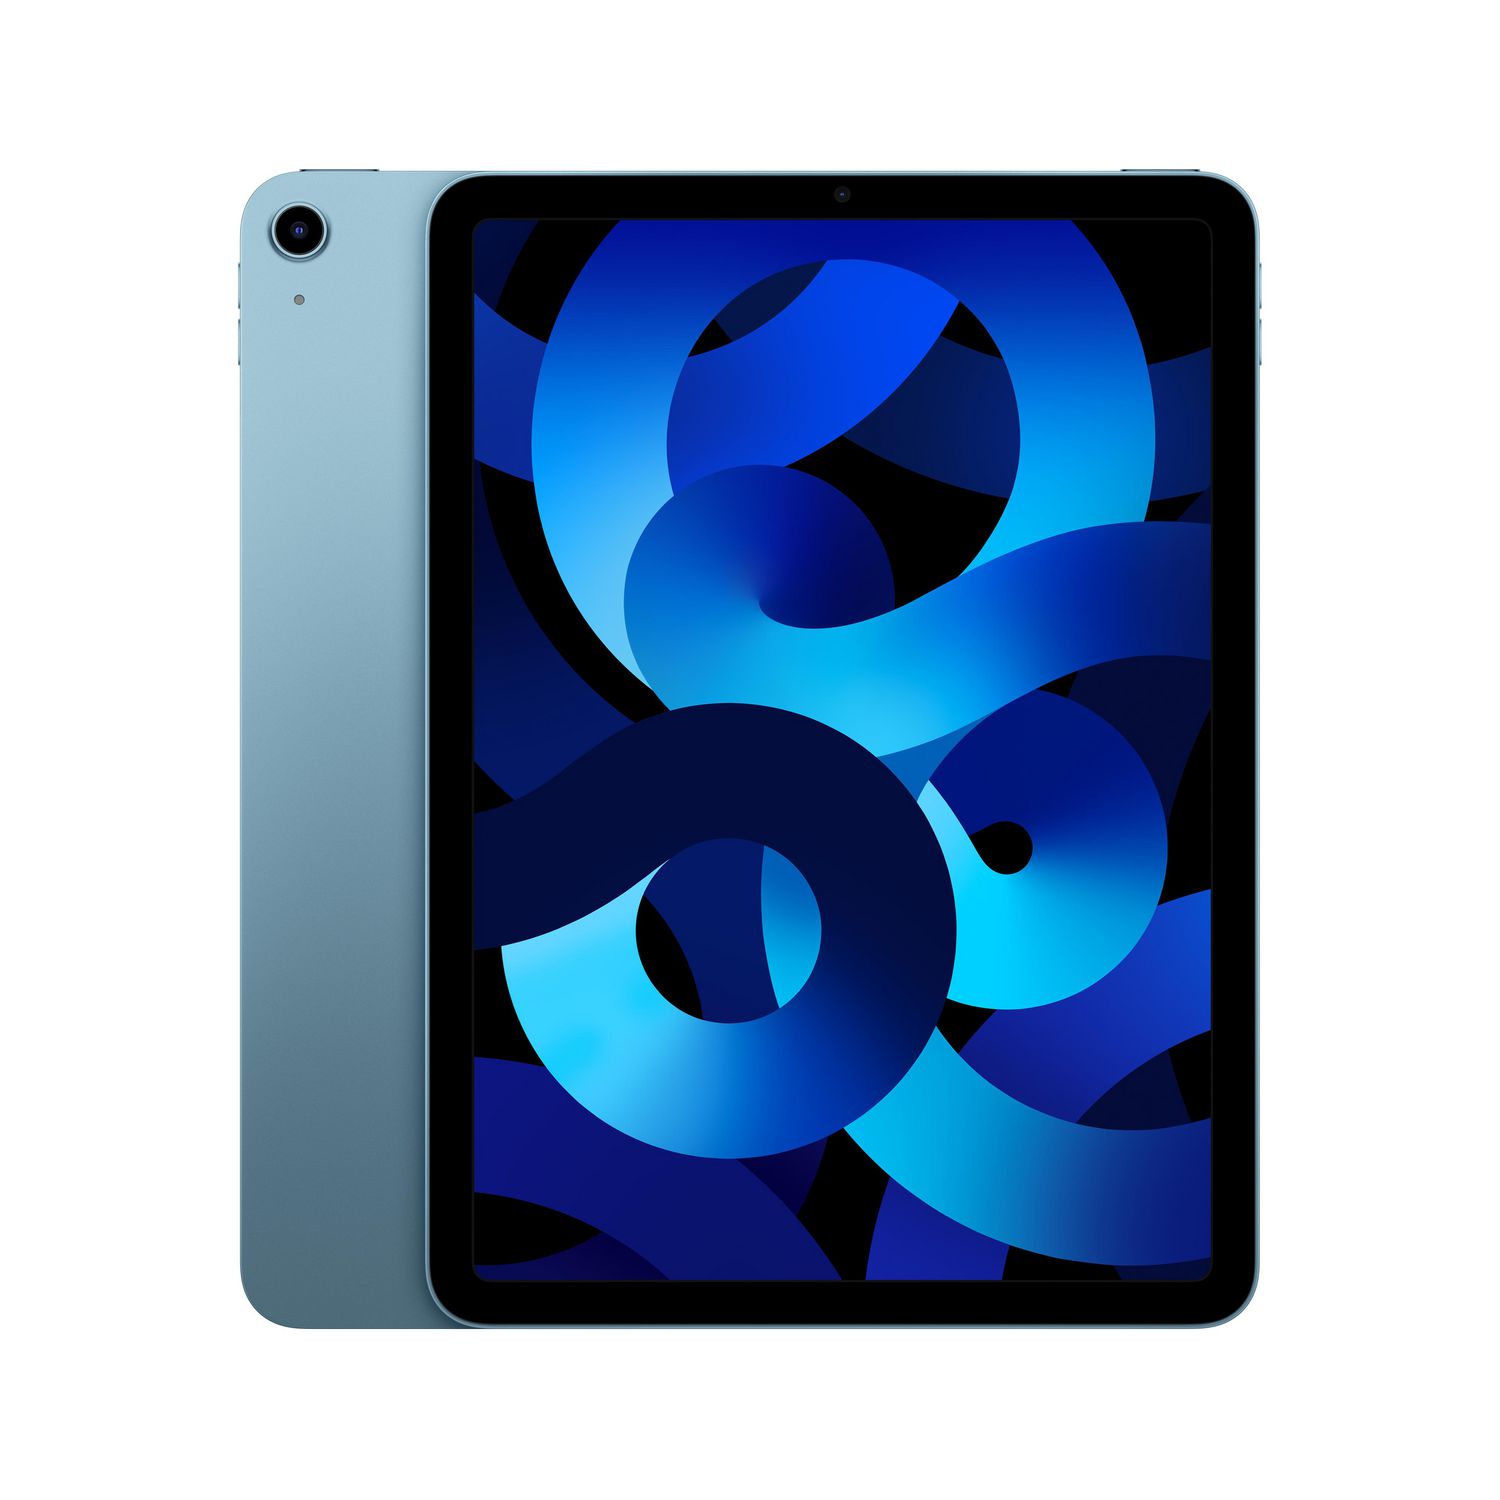 iPad Air (5th gen) 64g, Light. Bright. Full of might. Supercharged